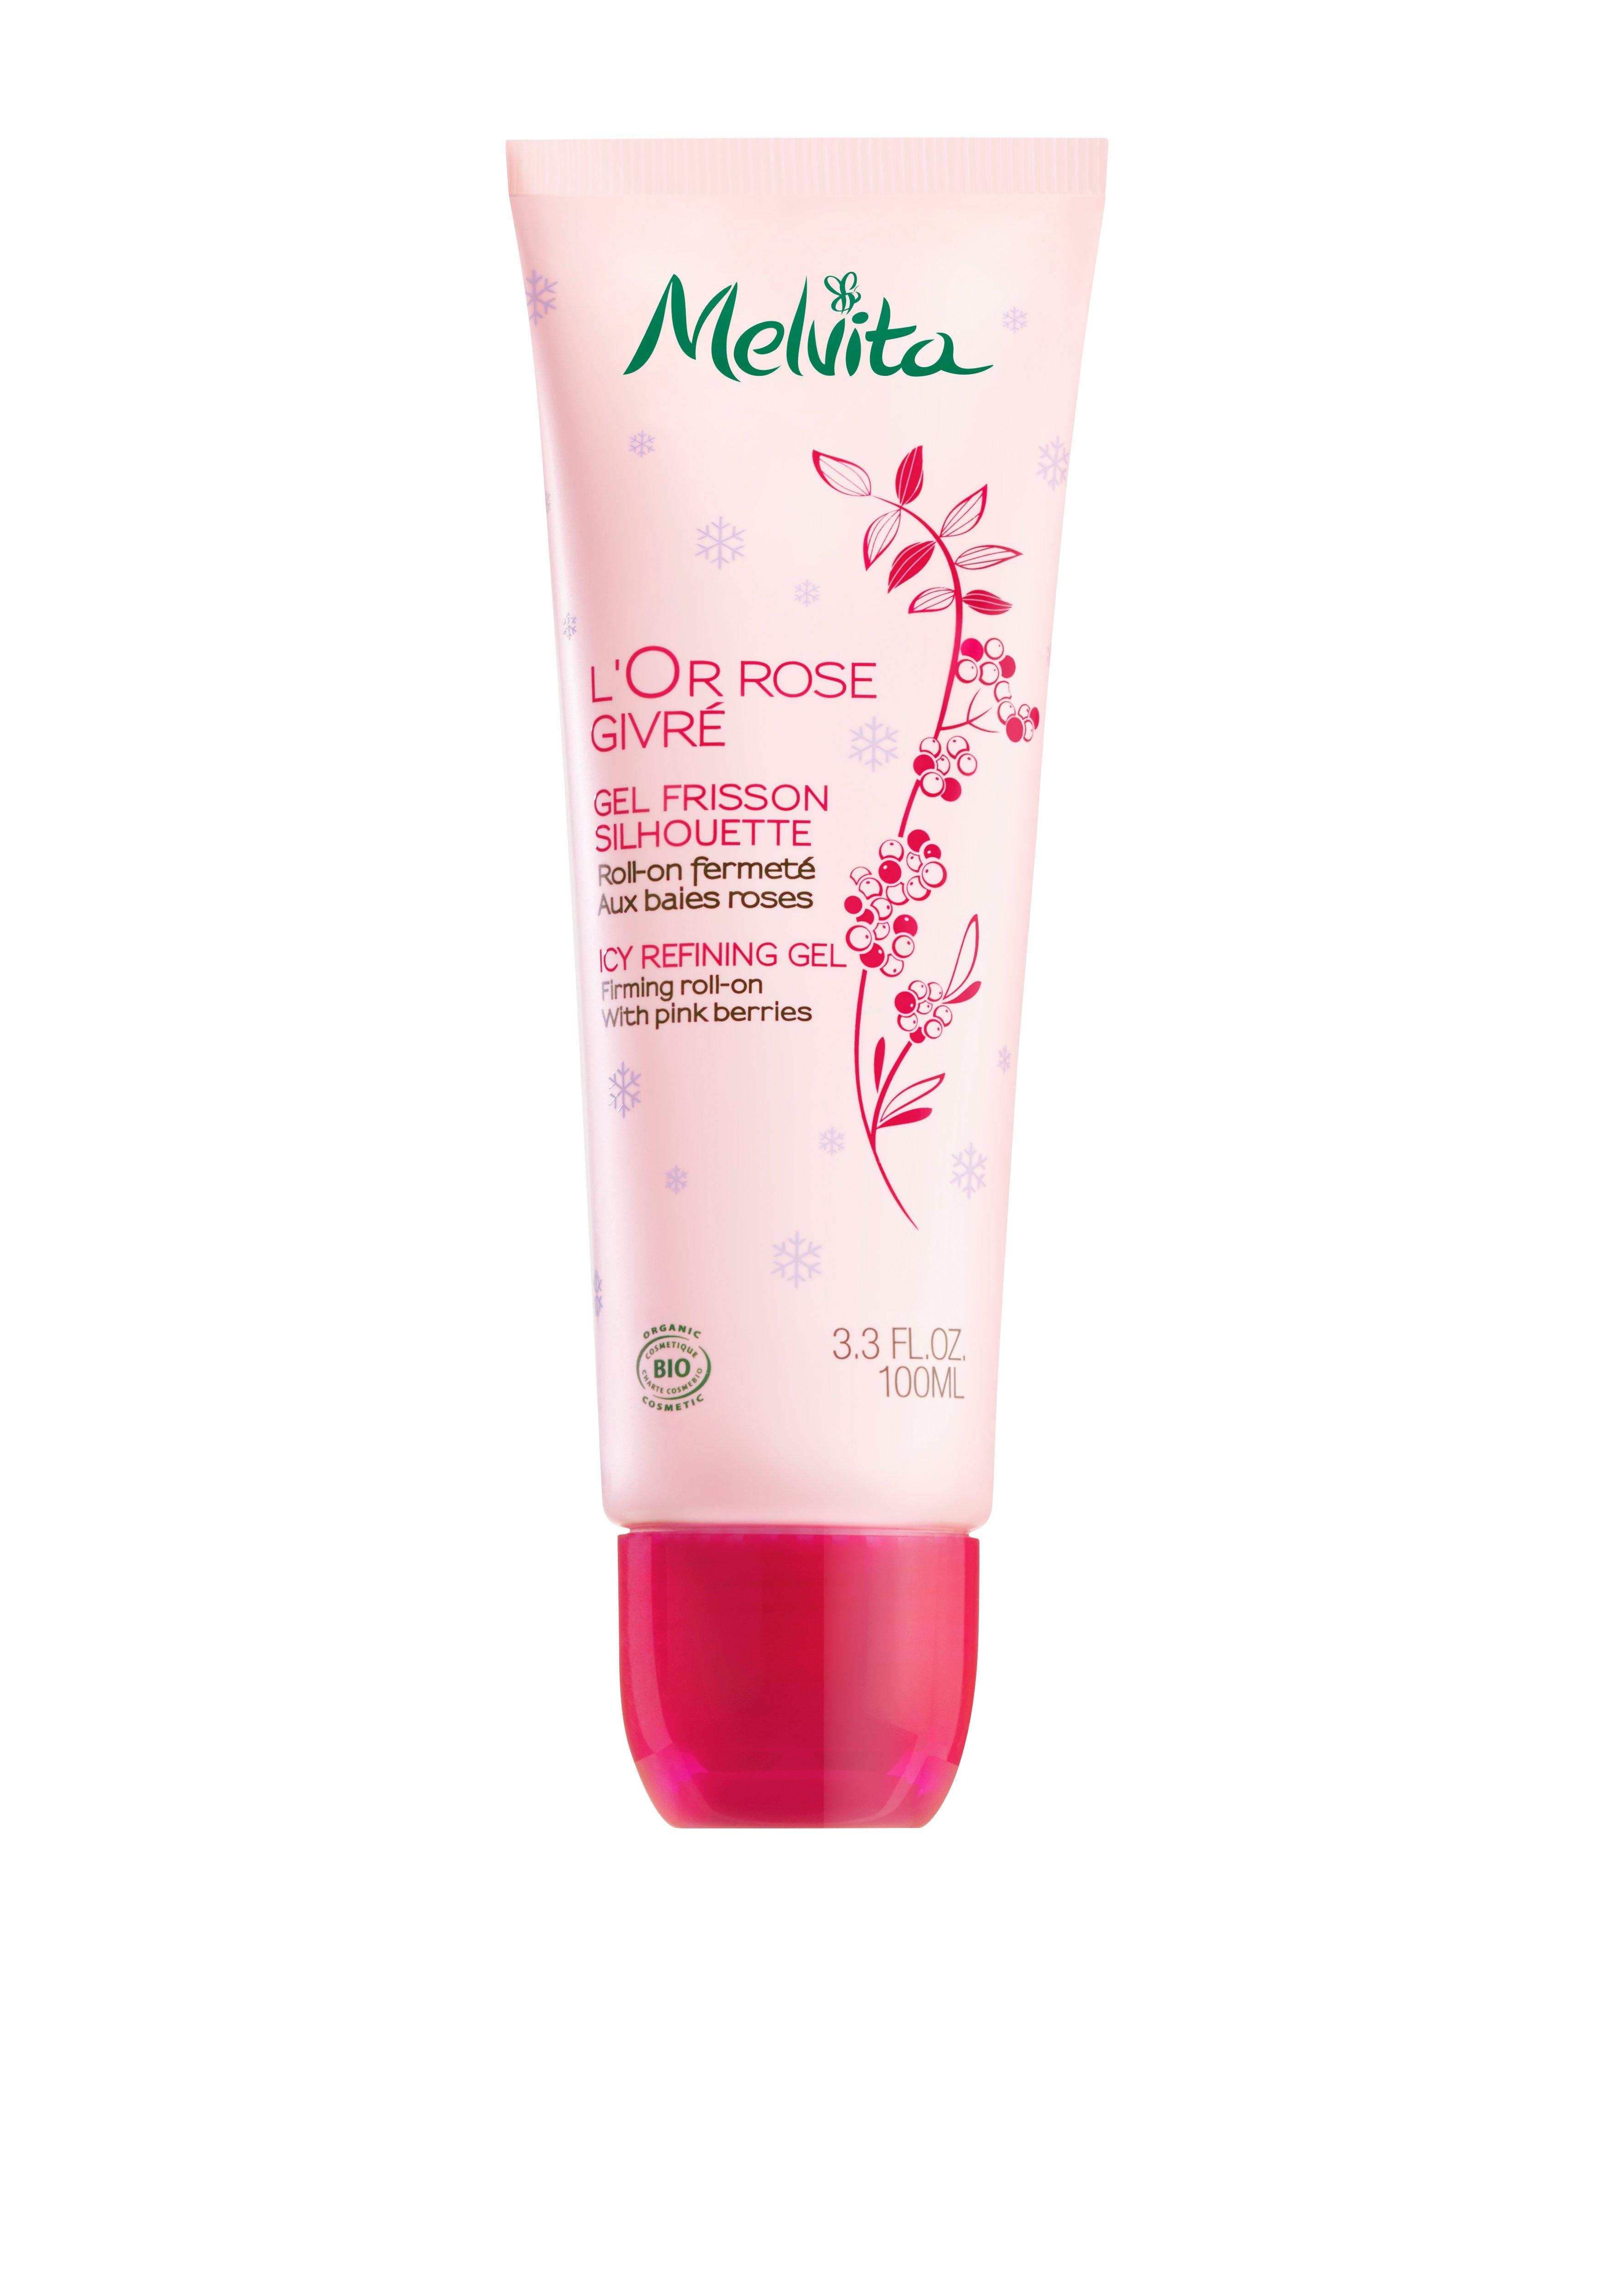 Image of Melvita L'Or Rose Givré Icy Refining Gel - 100 ml